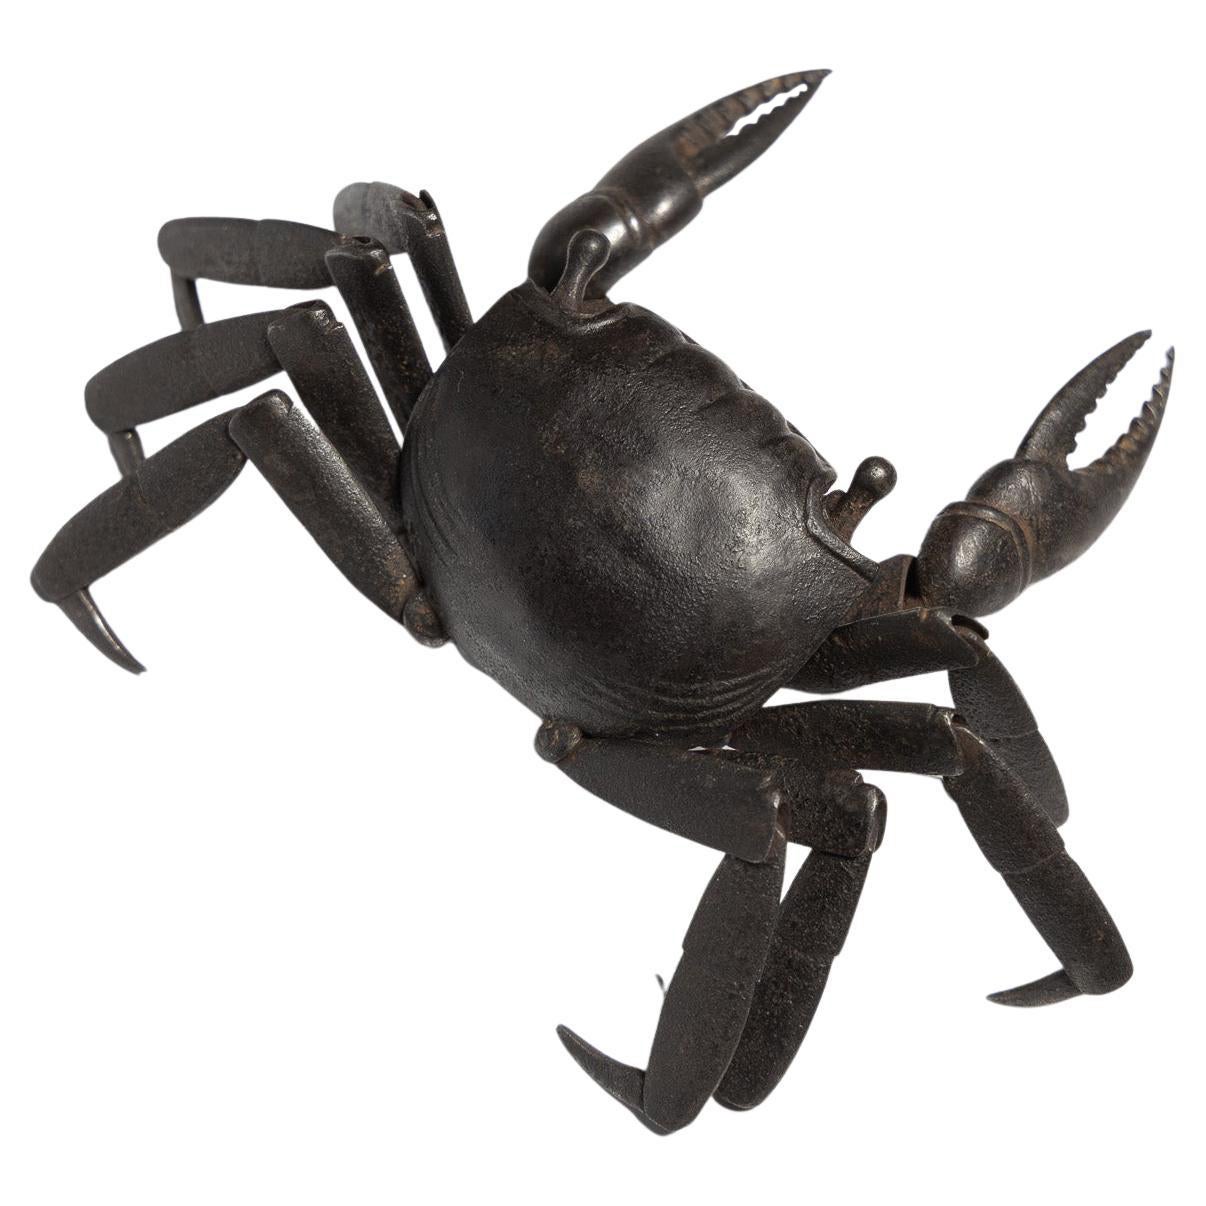 Jizai Okimono, Russet-Iron Articulated Figure of a Crab For Sale